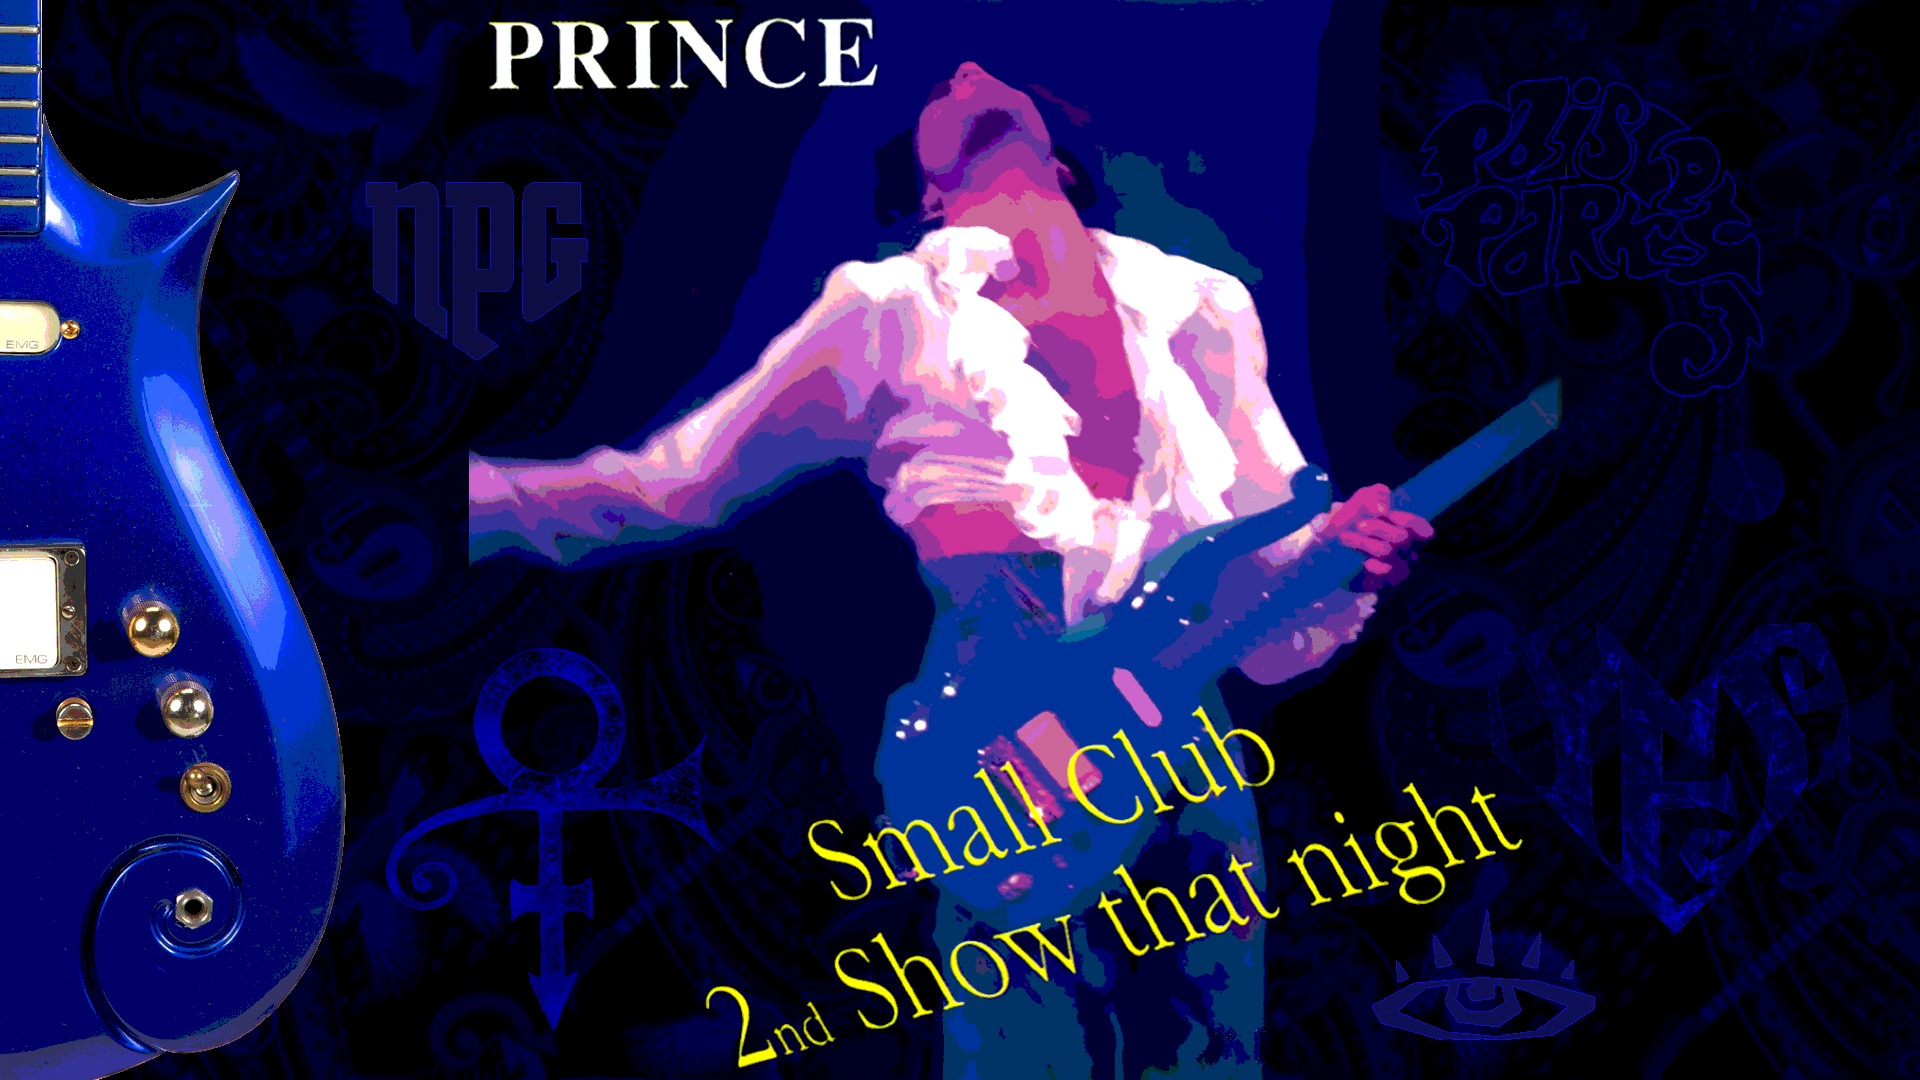 Prince and The New Power Generation | Small Club, 2nd Show That Night